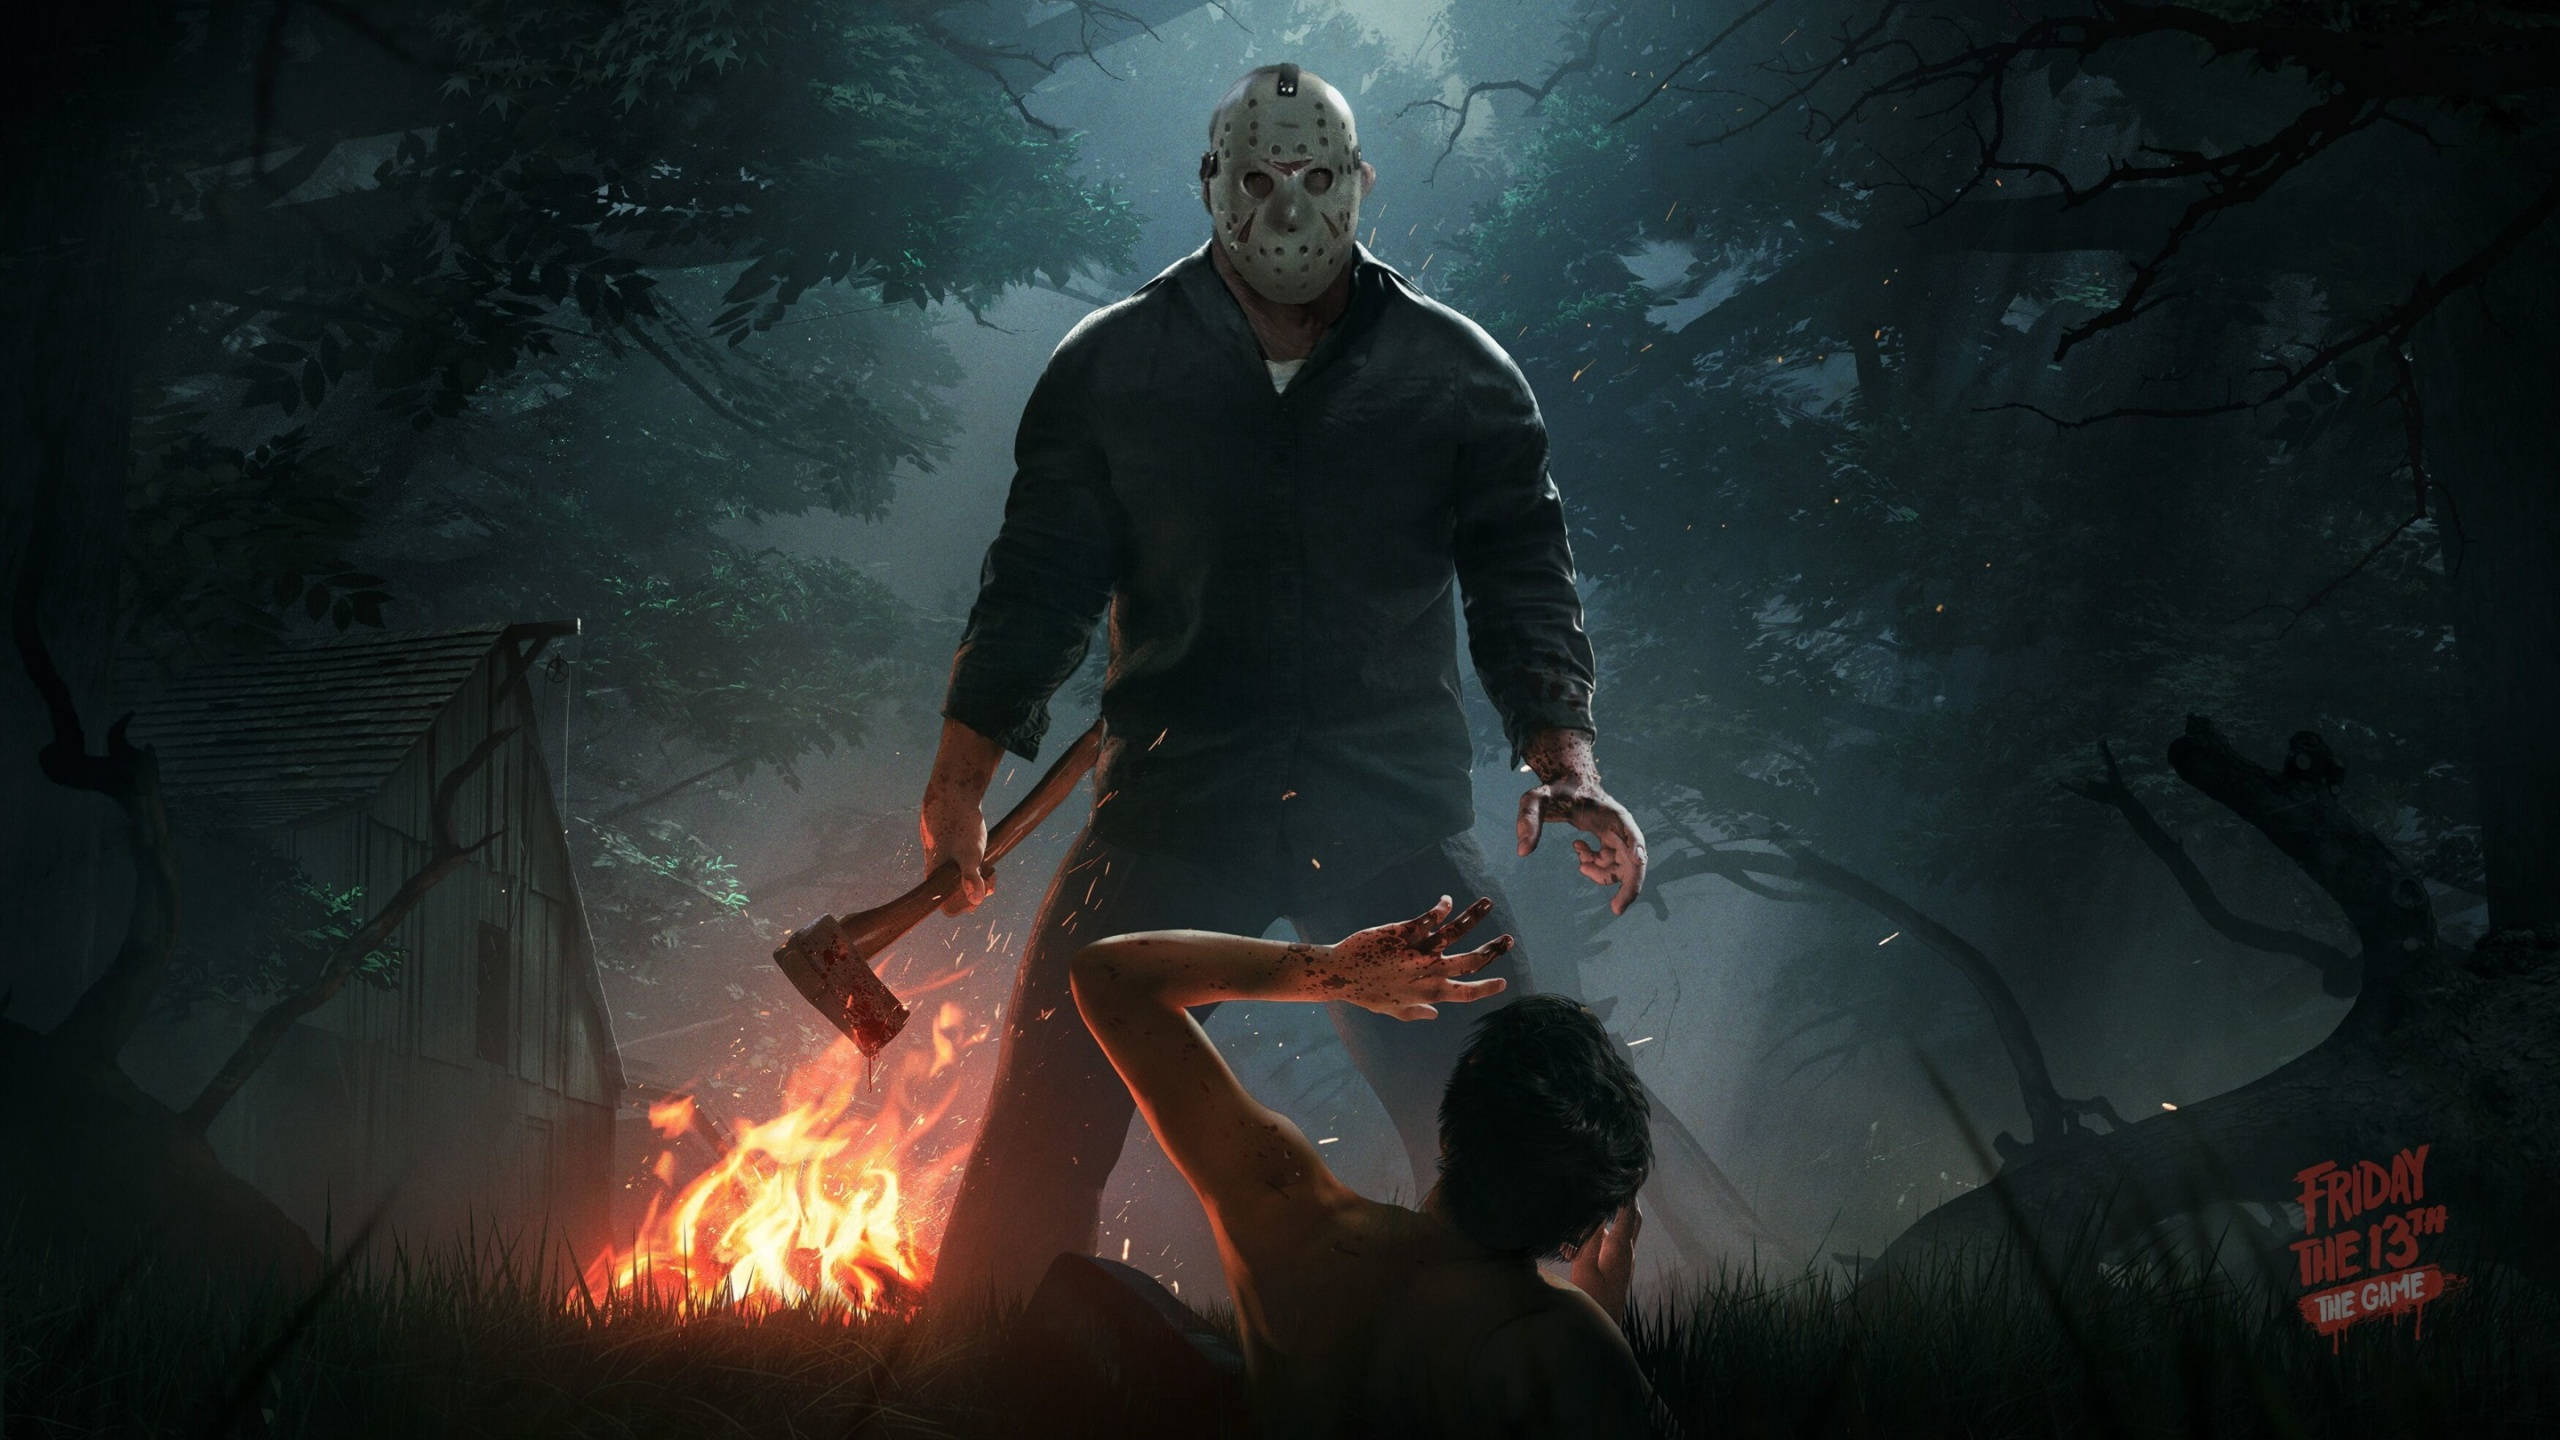 2560x1440 Gaming Friday The 13th Game Picture